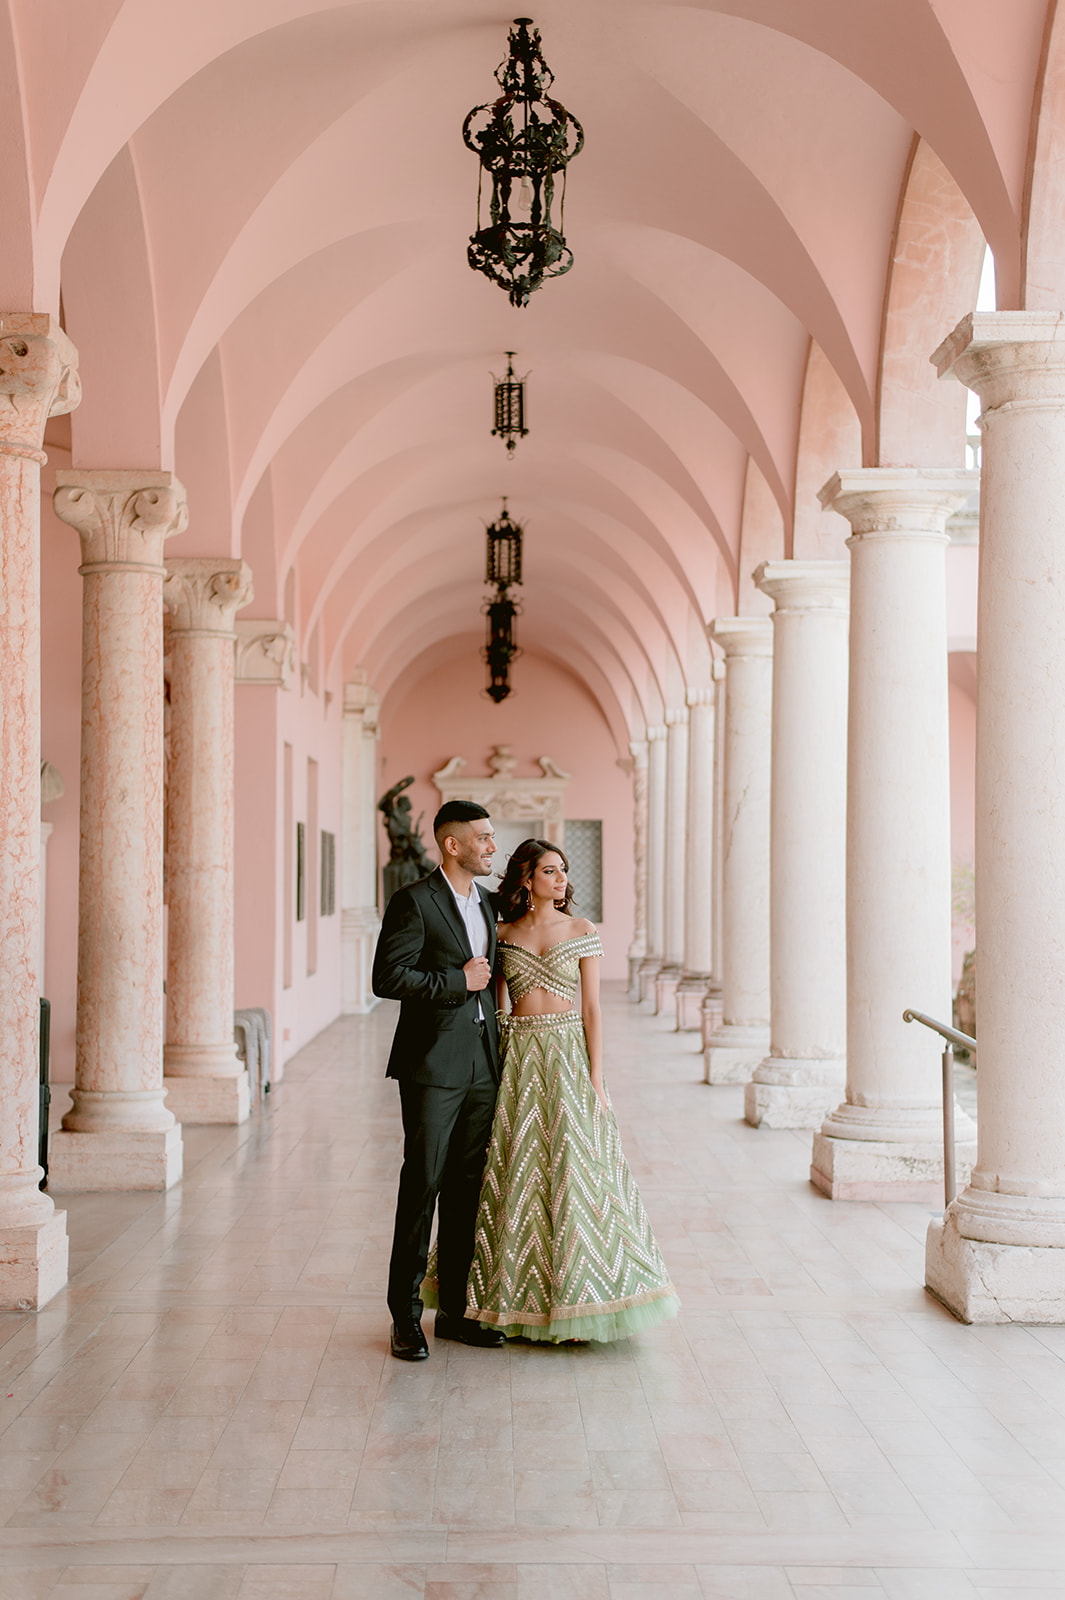 "Indian bride and groom showcasing their love at the Ringling Museum's Ca' d'Zan"
